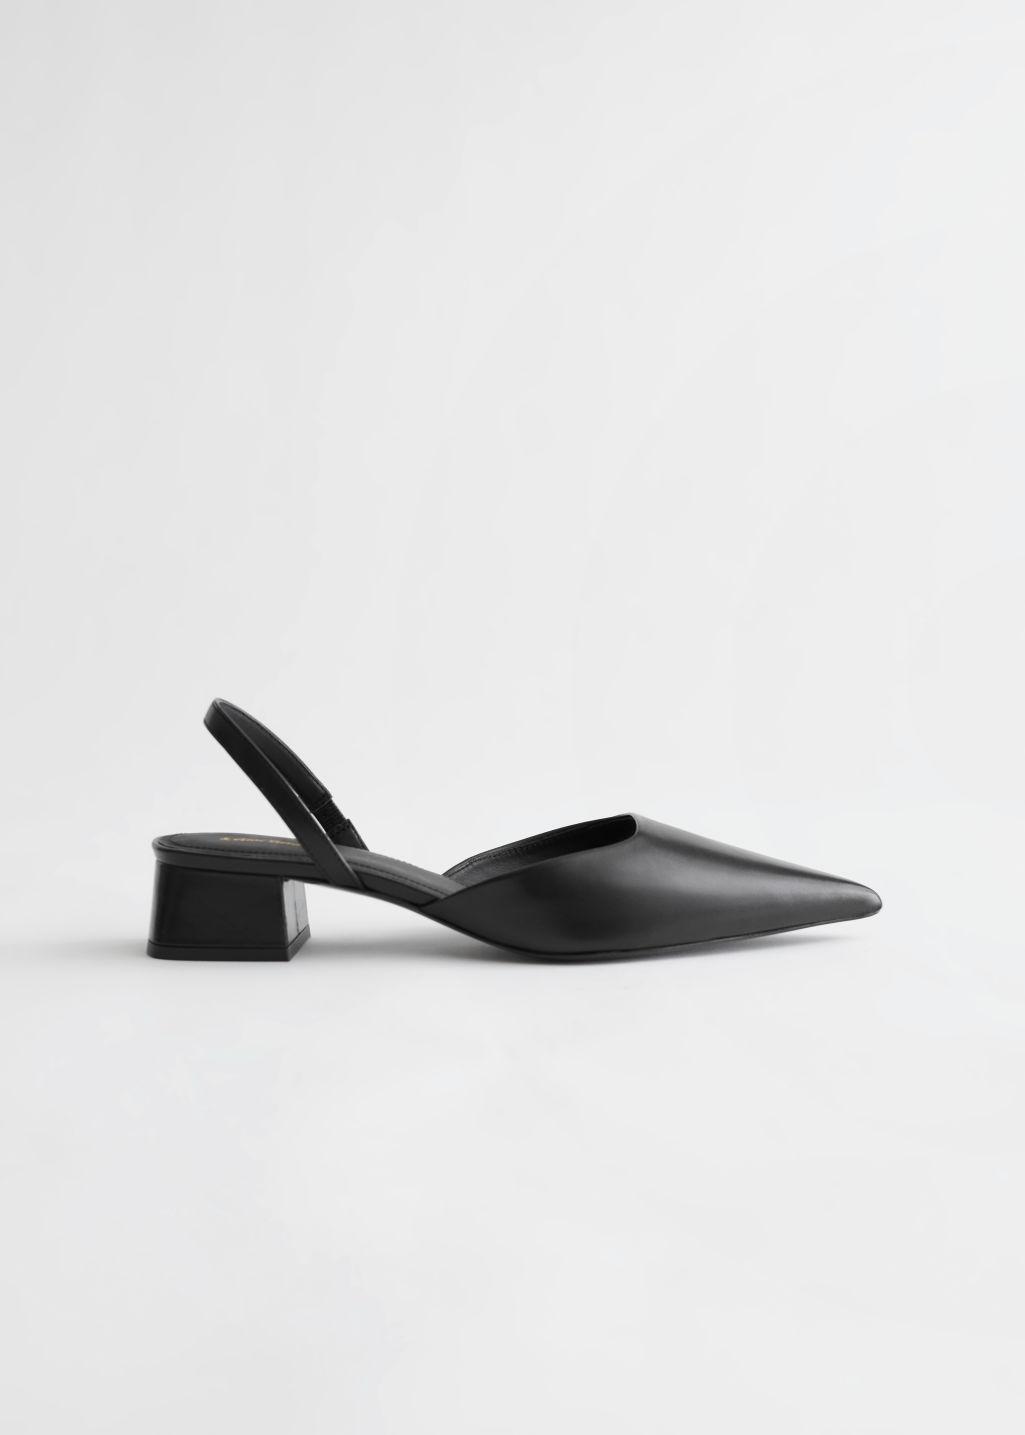 & Other Stories Leather Pointed Block Heel Mules in Black - Lyst